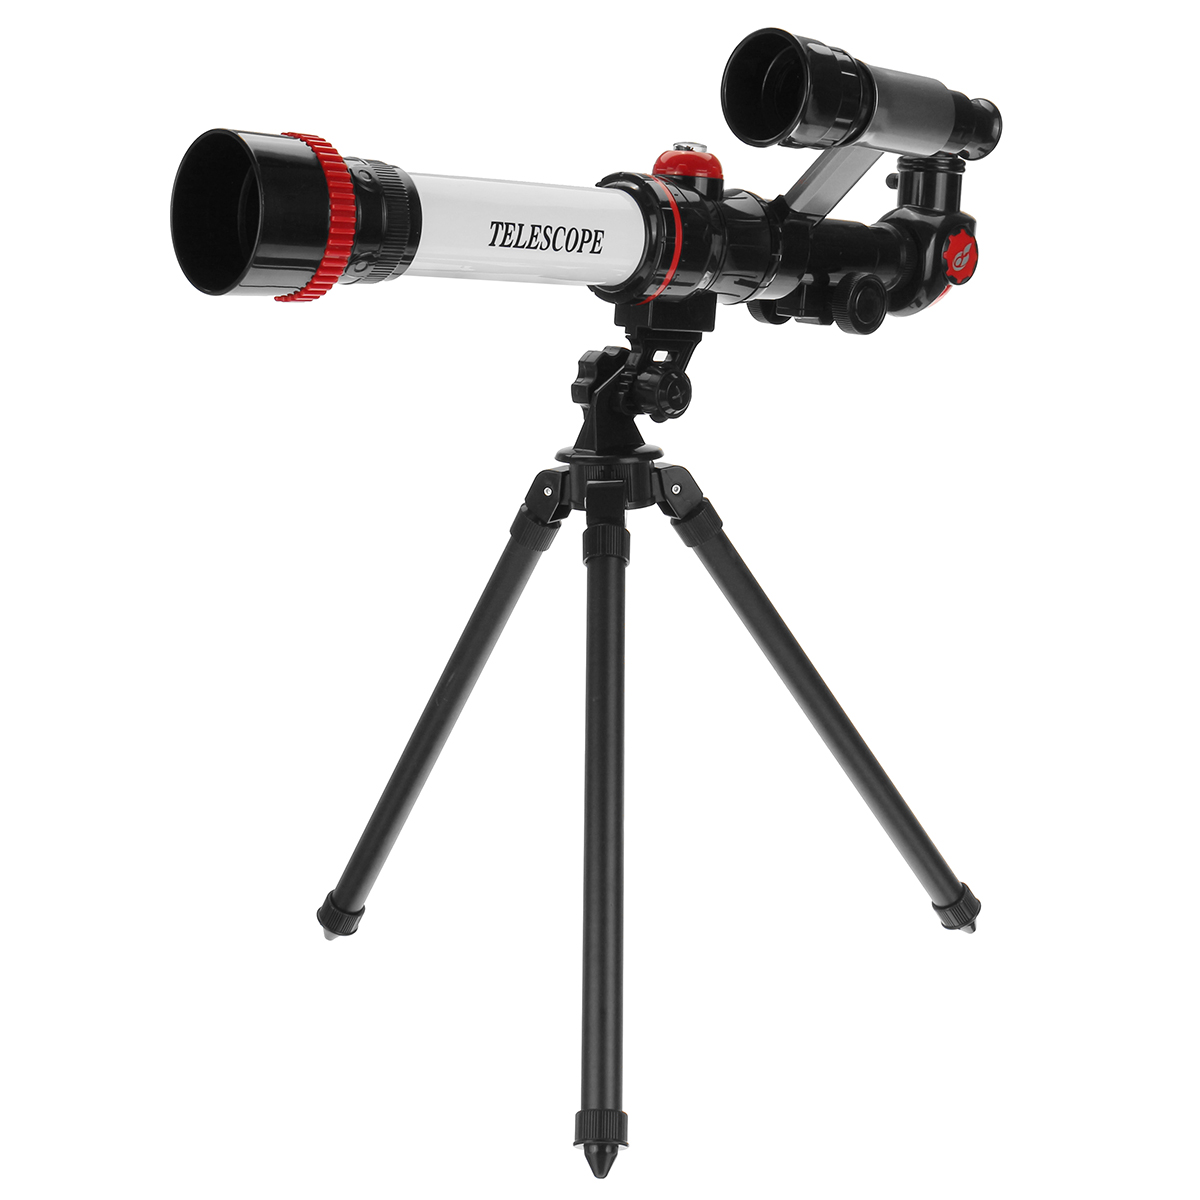 30-40X-Astronomical-Telescope-HD-Refraction-Optical-Monoculars-for-Adult-Kids-Beginners-with-Tripod-1836751-8